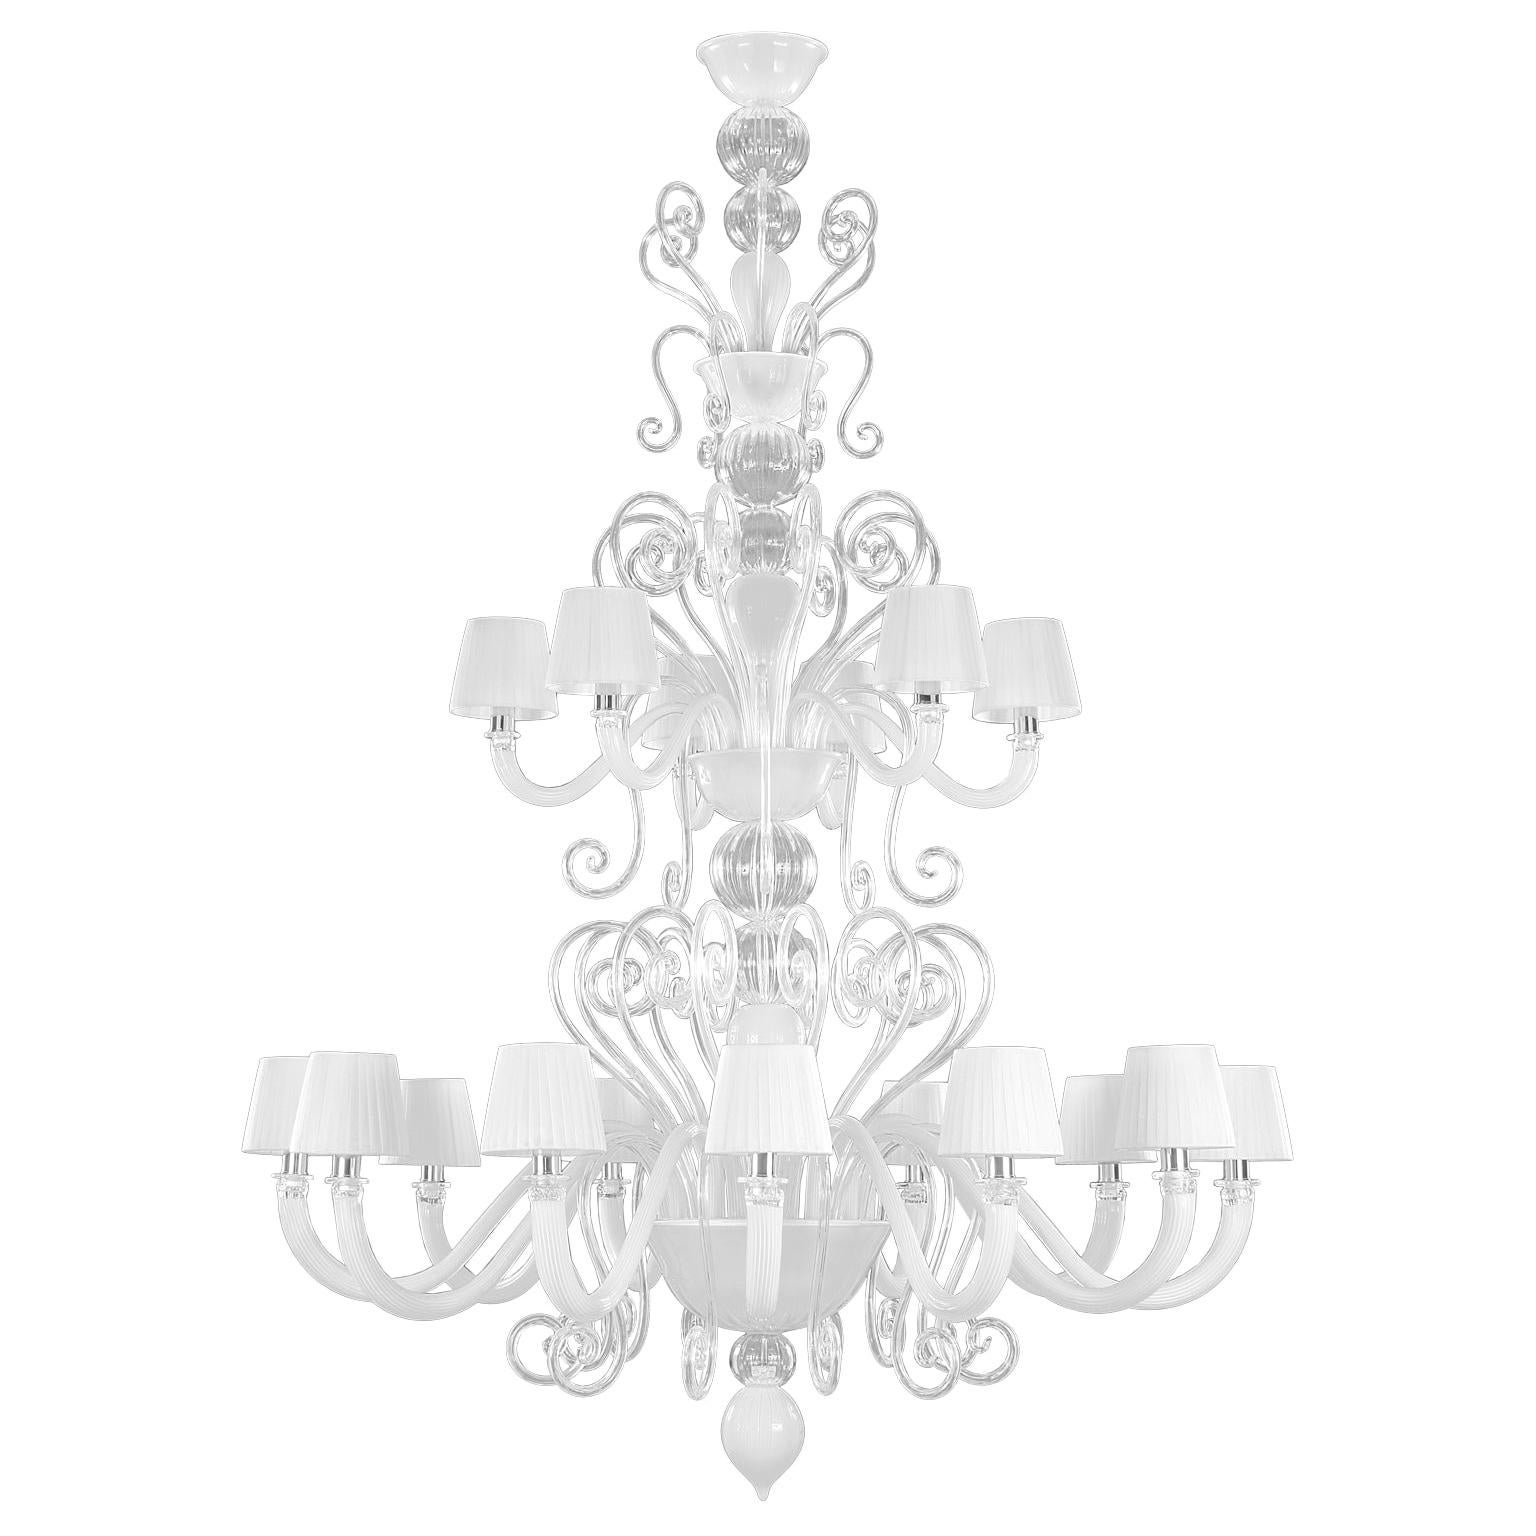 Artistic Chandelier 12+6 arms White Crystal Murano Glass Gatsby by Multiforme